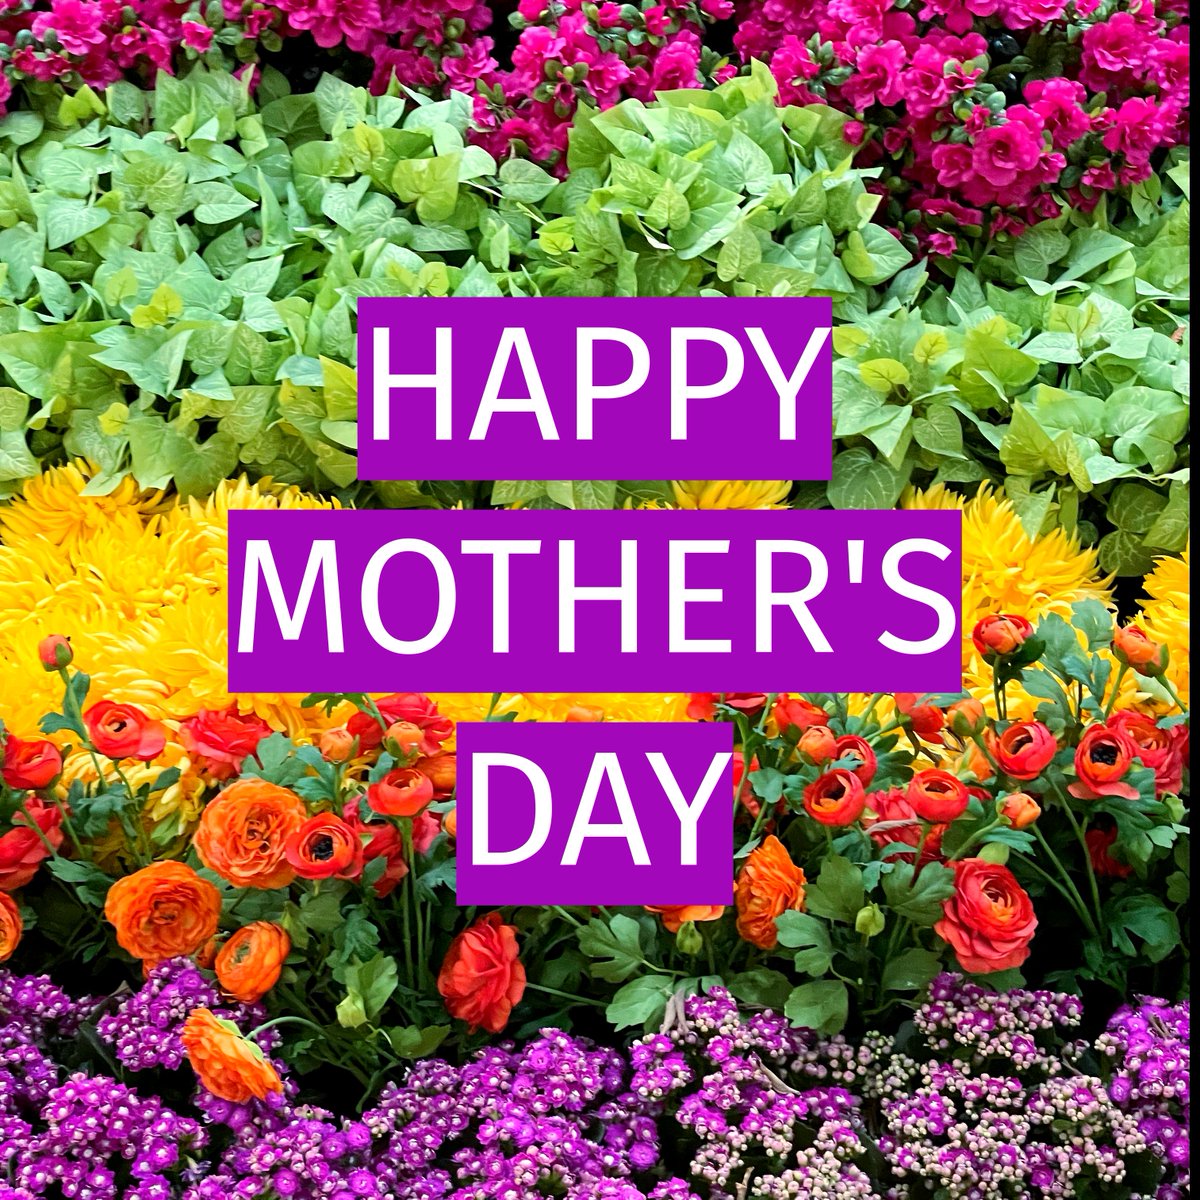 Happy mother's day to the guiding light in our lives, whose love knows no bounds. Today, we celebrate the strength, grace, and unconditional love of all mothers. 💐 #mothersday #momlove #gratitude #familyfirst #unconditionallove #celebratemom #motherhood #thankyoumom'